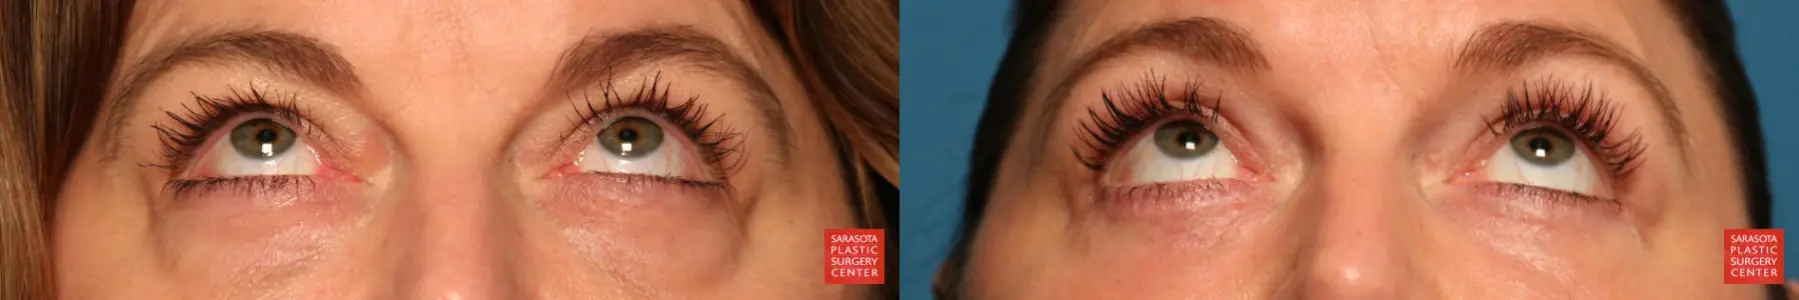 Eyelid Lift: Patient 5 - Before and After 3